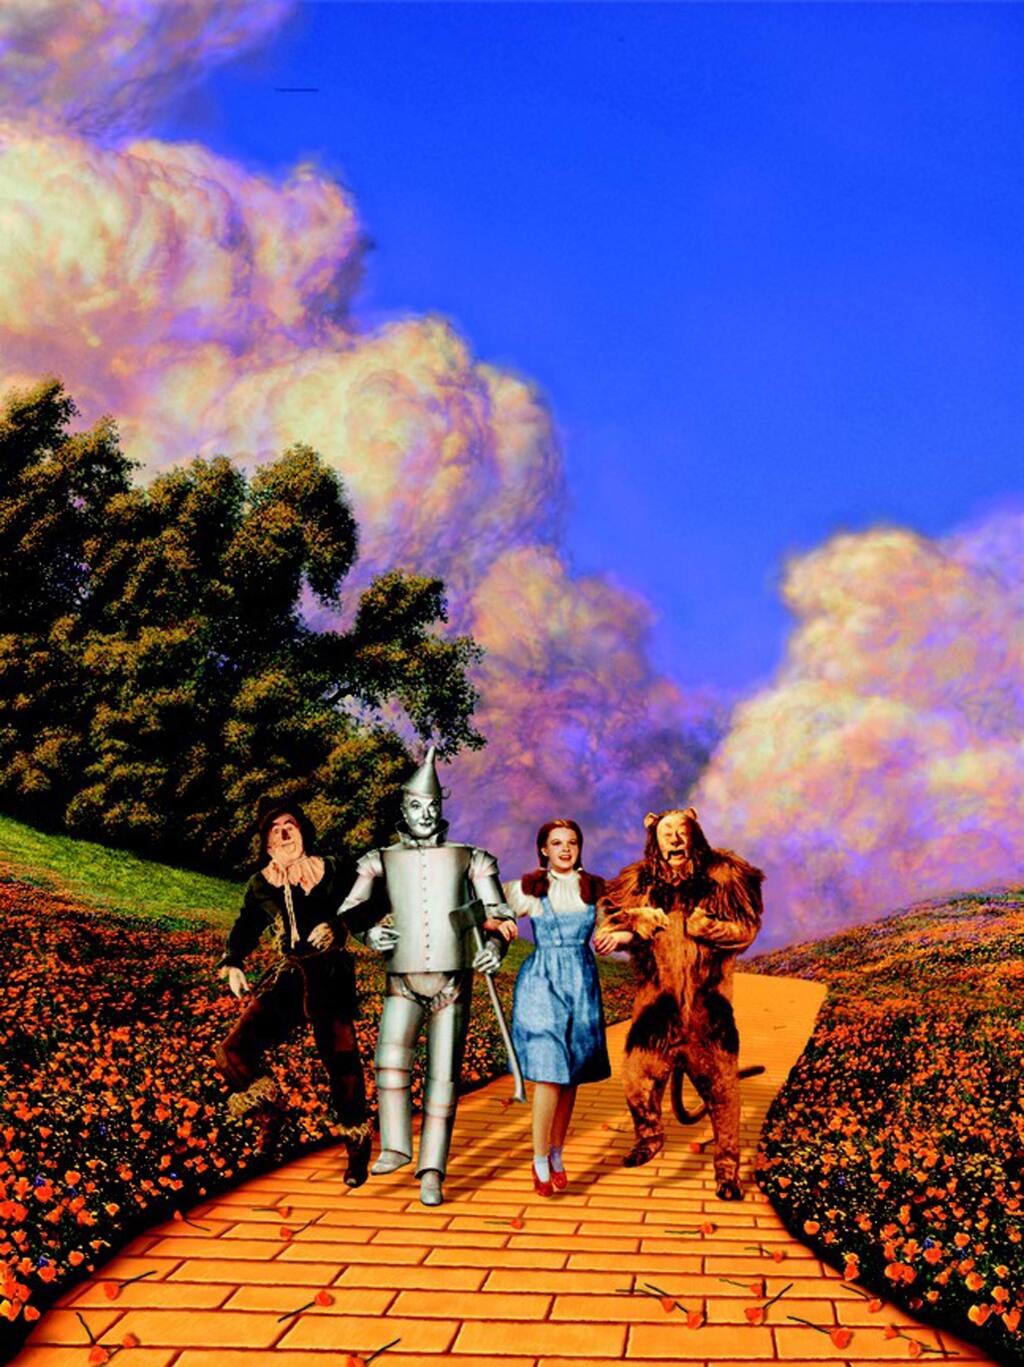 The Wizard of Oz,” the Last Munchkin, and the Little People Left Behind